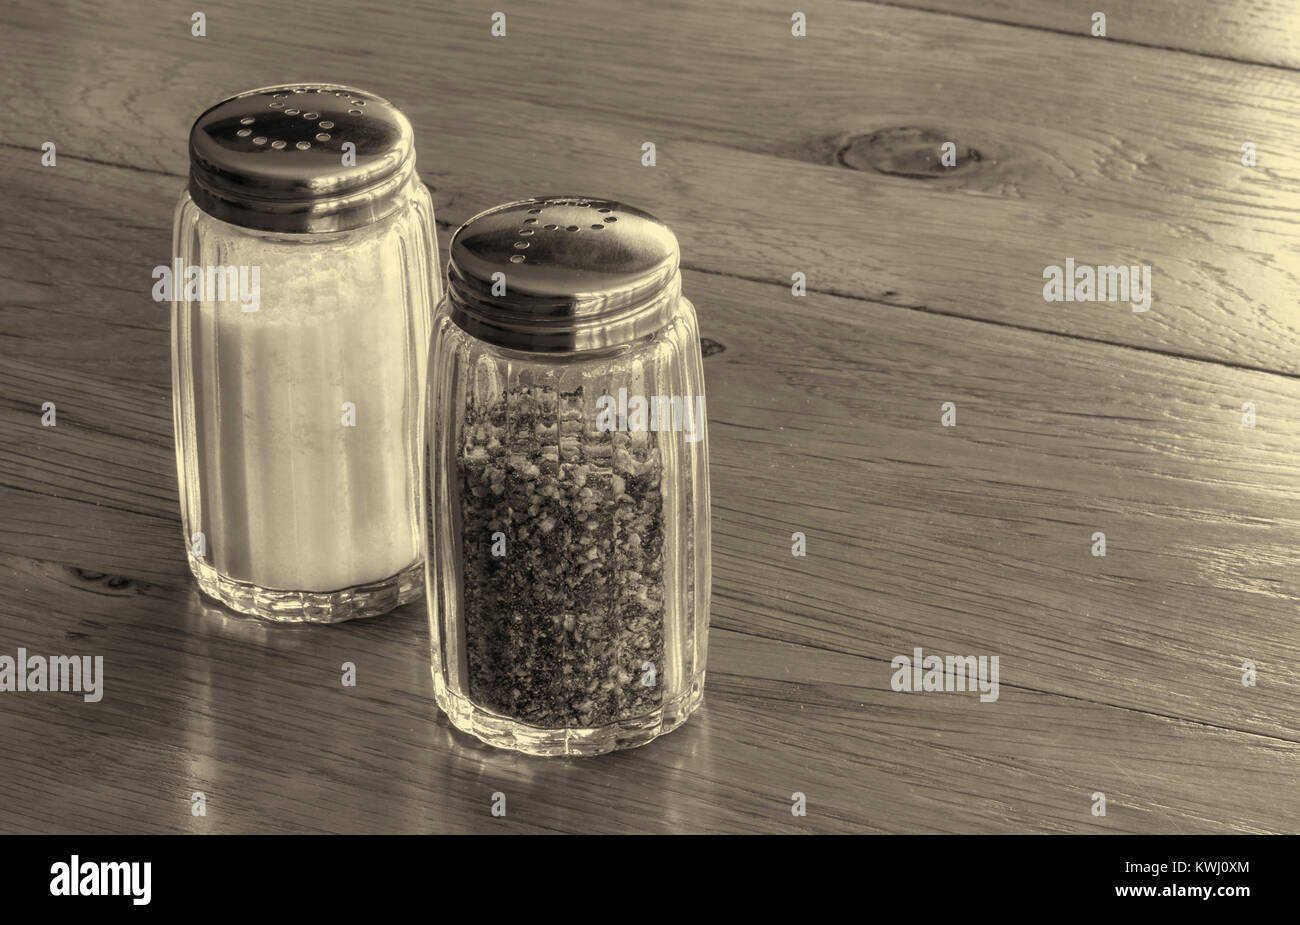 Close up of glass salt and pepper shakers or salt and pepper pots on a wooden table . Stock Photo